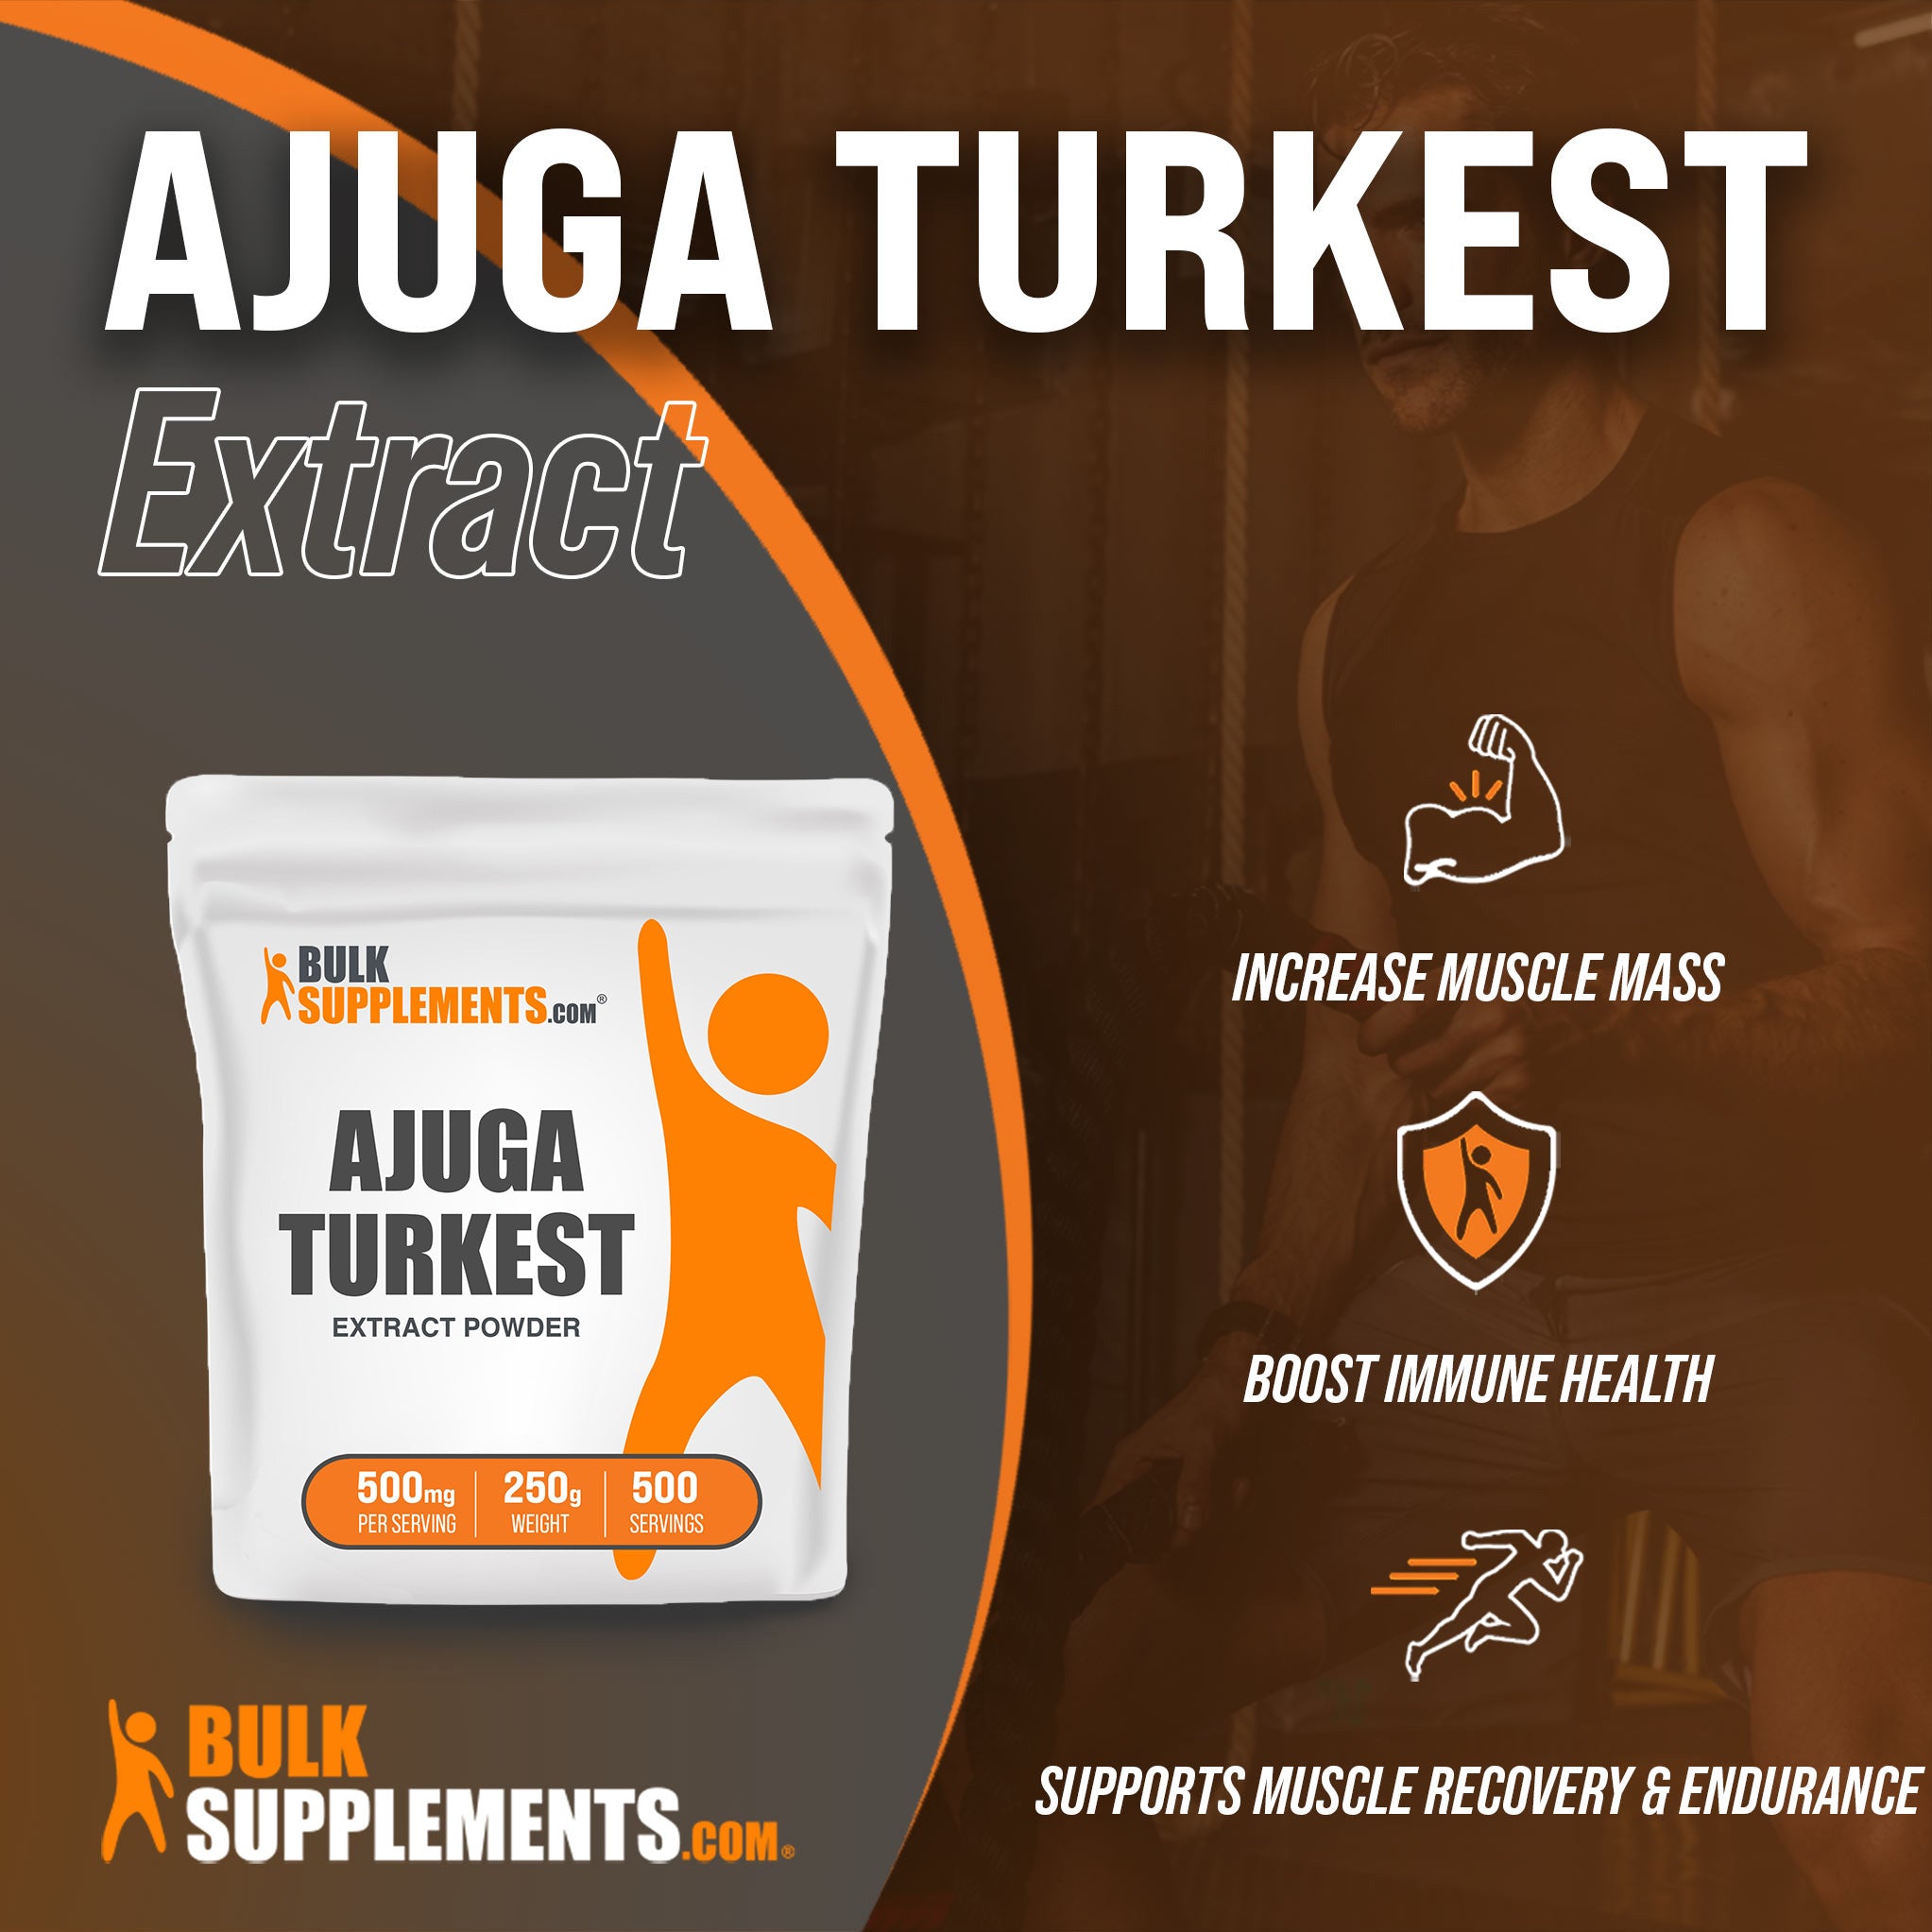 Ajuga Turkest Extract for muscle mass, endurance and immune health